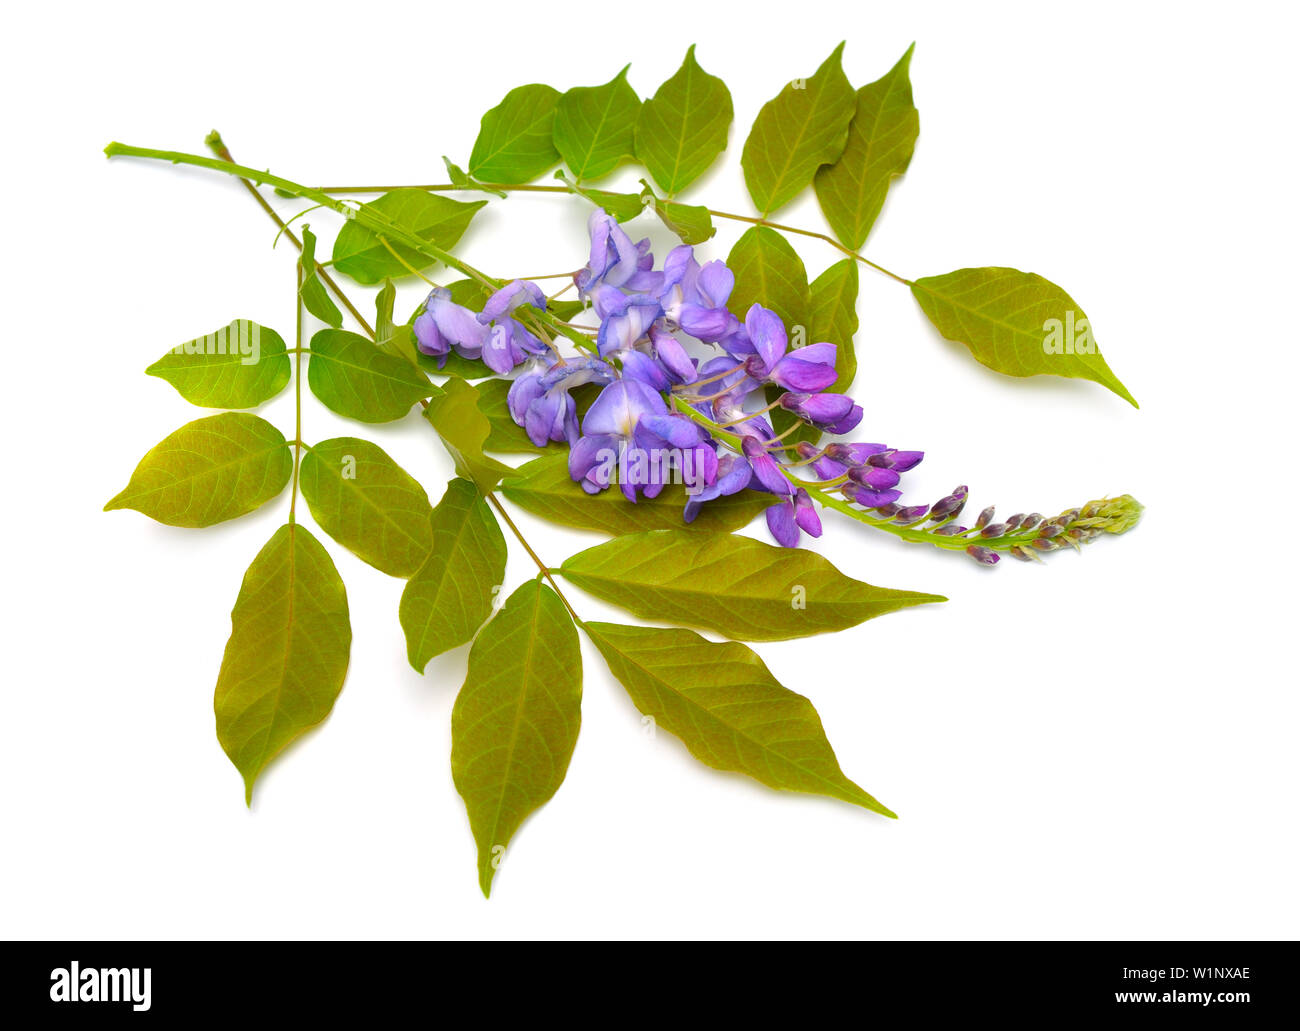 Wisteria sinensis or Chinese wisteria isolated on white background Stock Photo